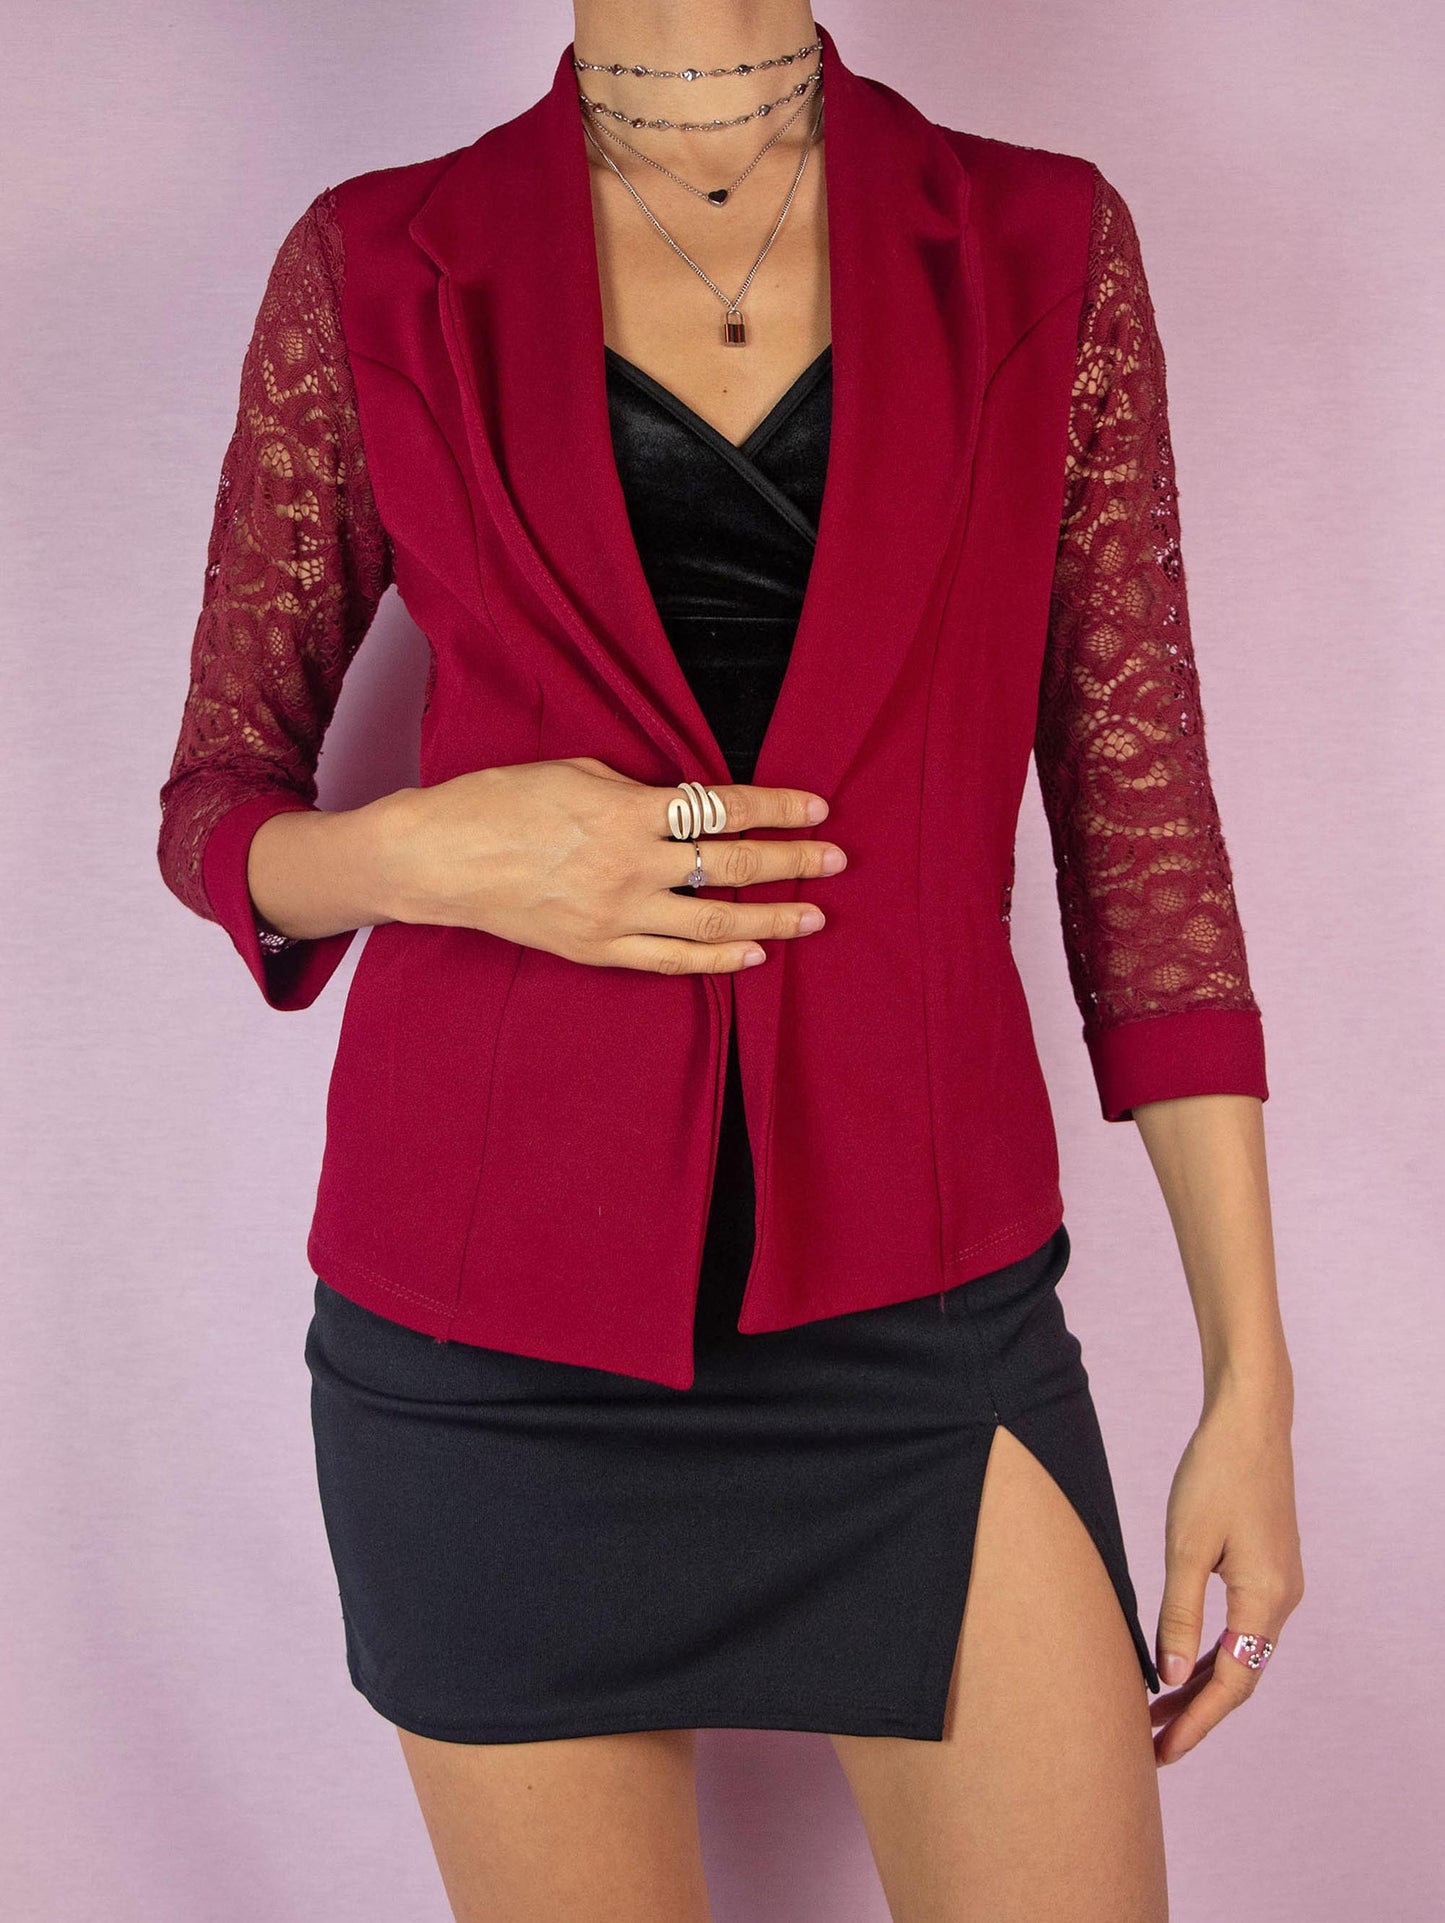 The Y2K Red Lace Bolero Jacket is a vintage 2000s romantic open blazer for an elegant party, featuring a collar and three-quarter sleeves.